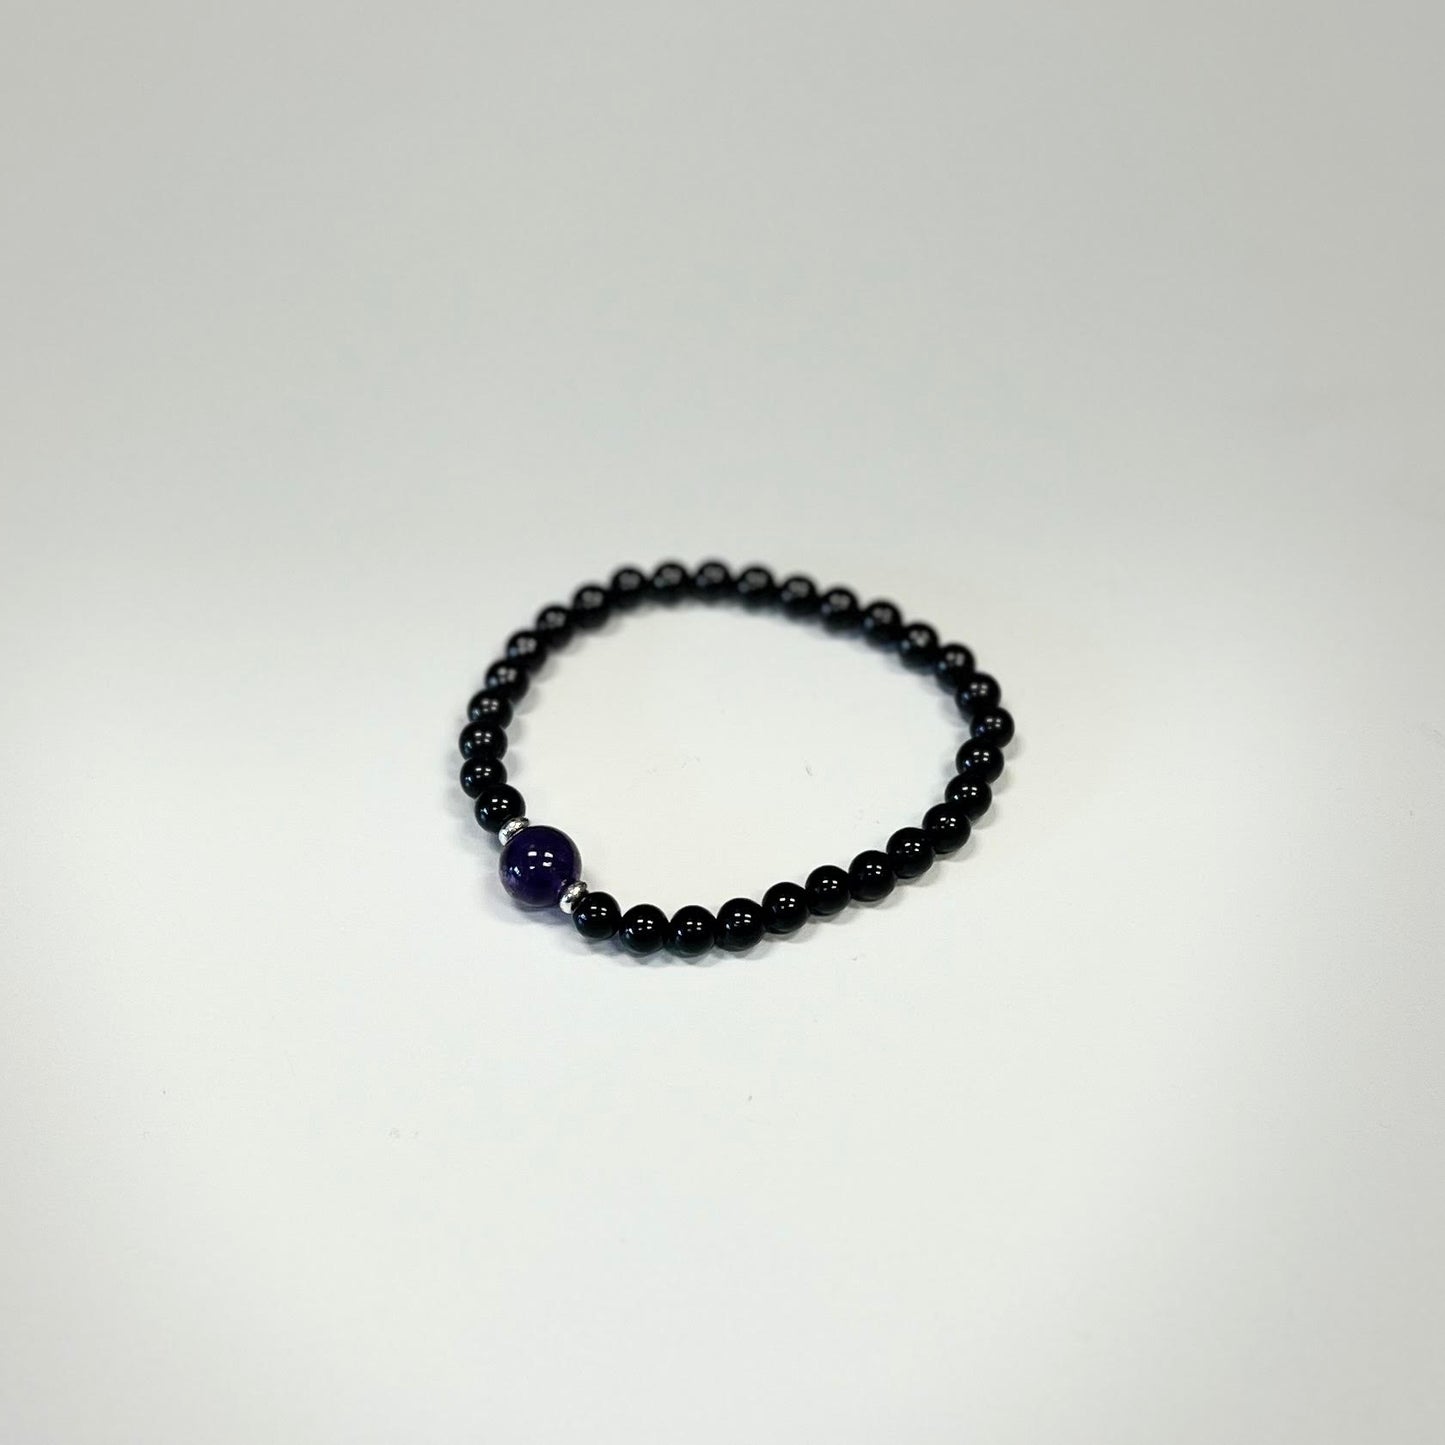 Black Tourmaline and Amethyst (Silver Accent) Beaded Bracelet 8mm